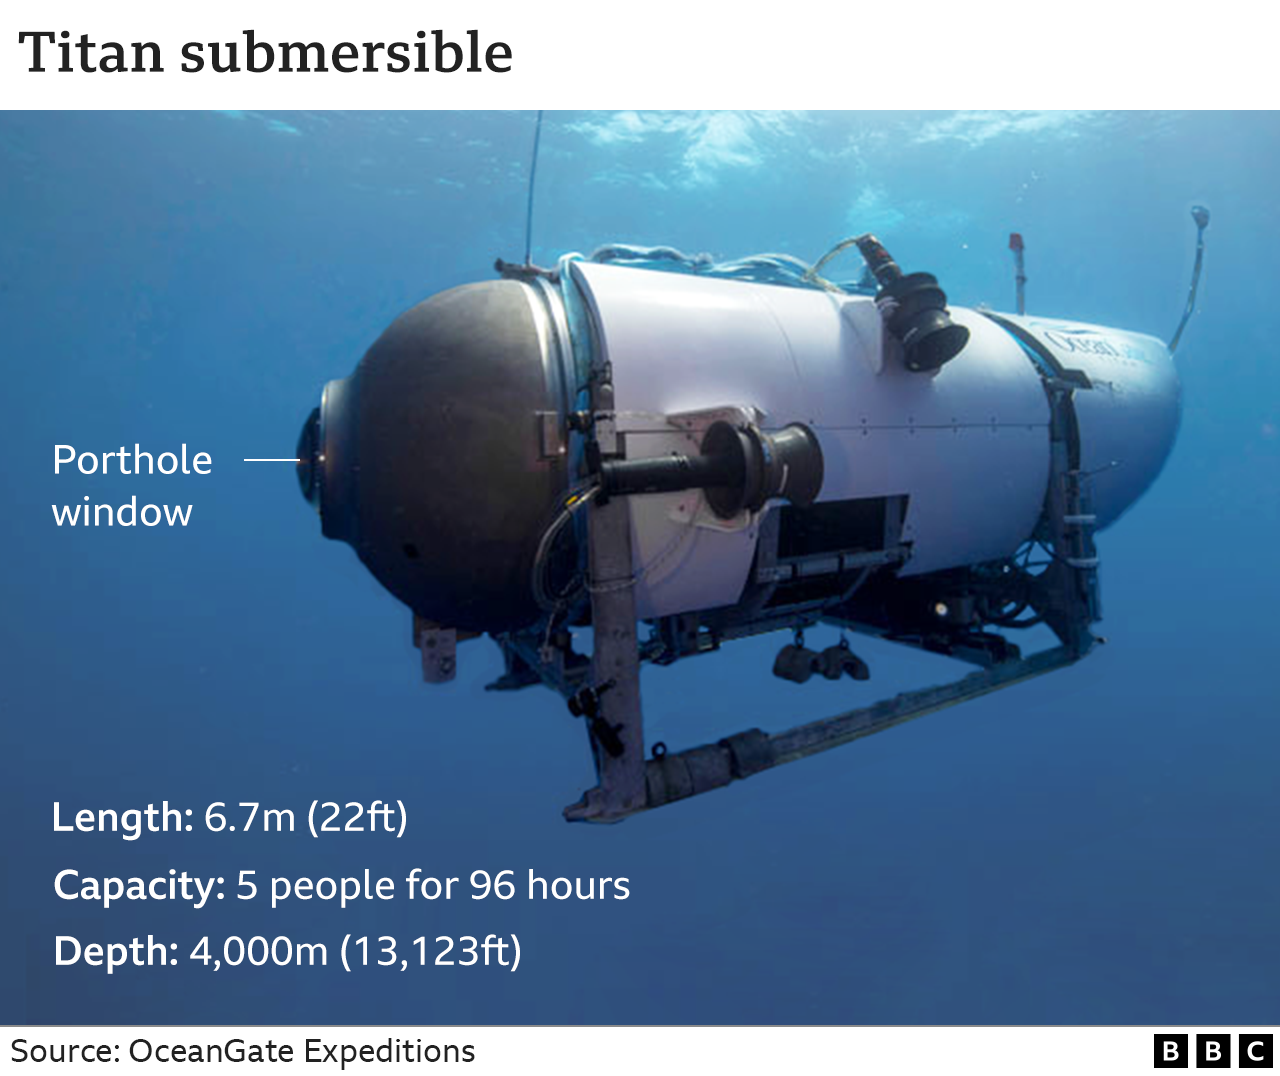 Titan submersible from OceanGate